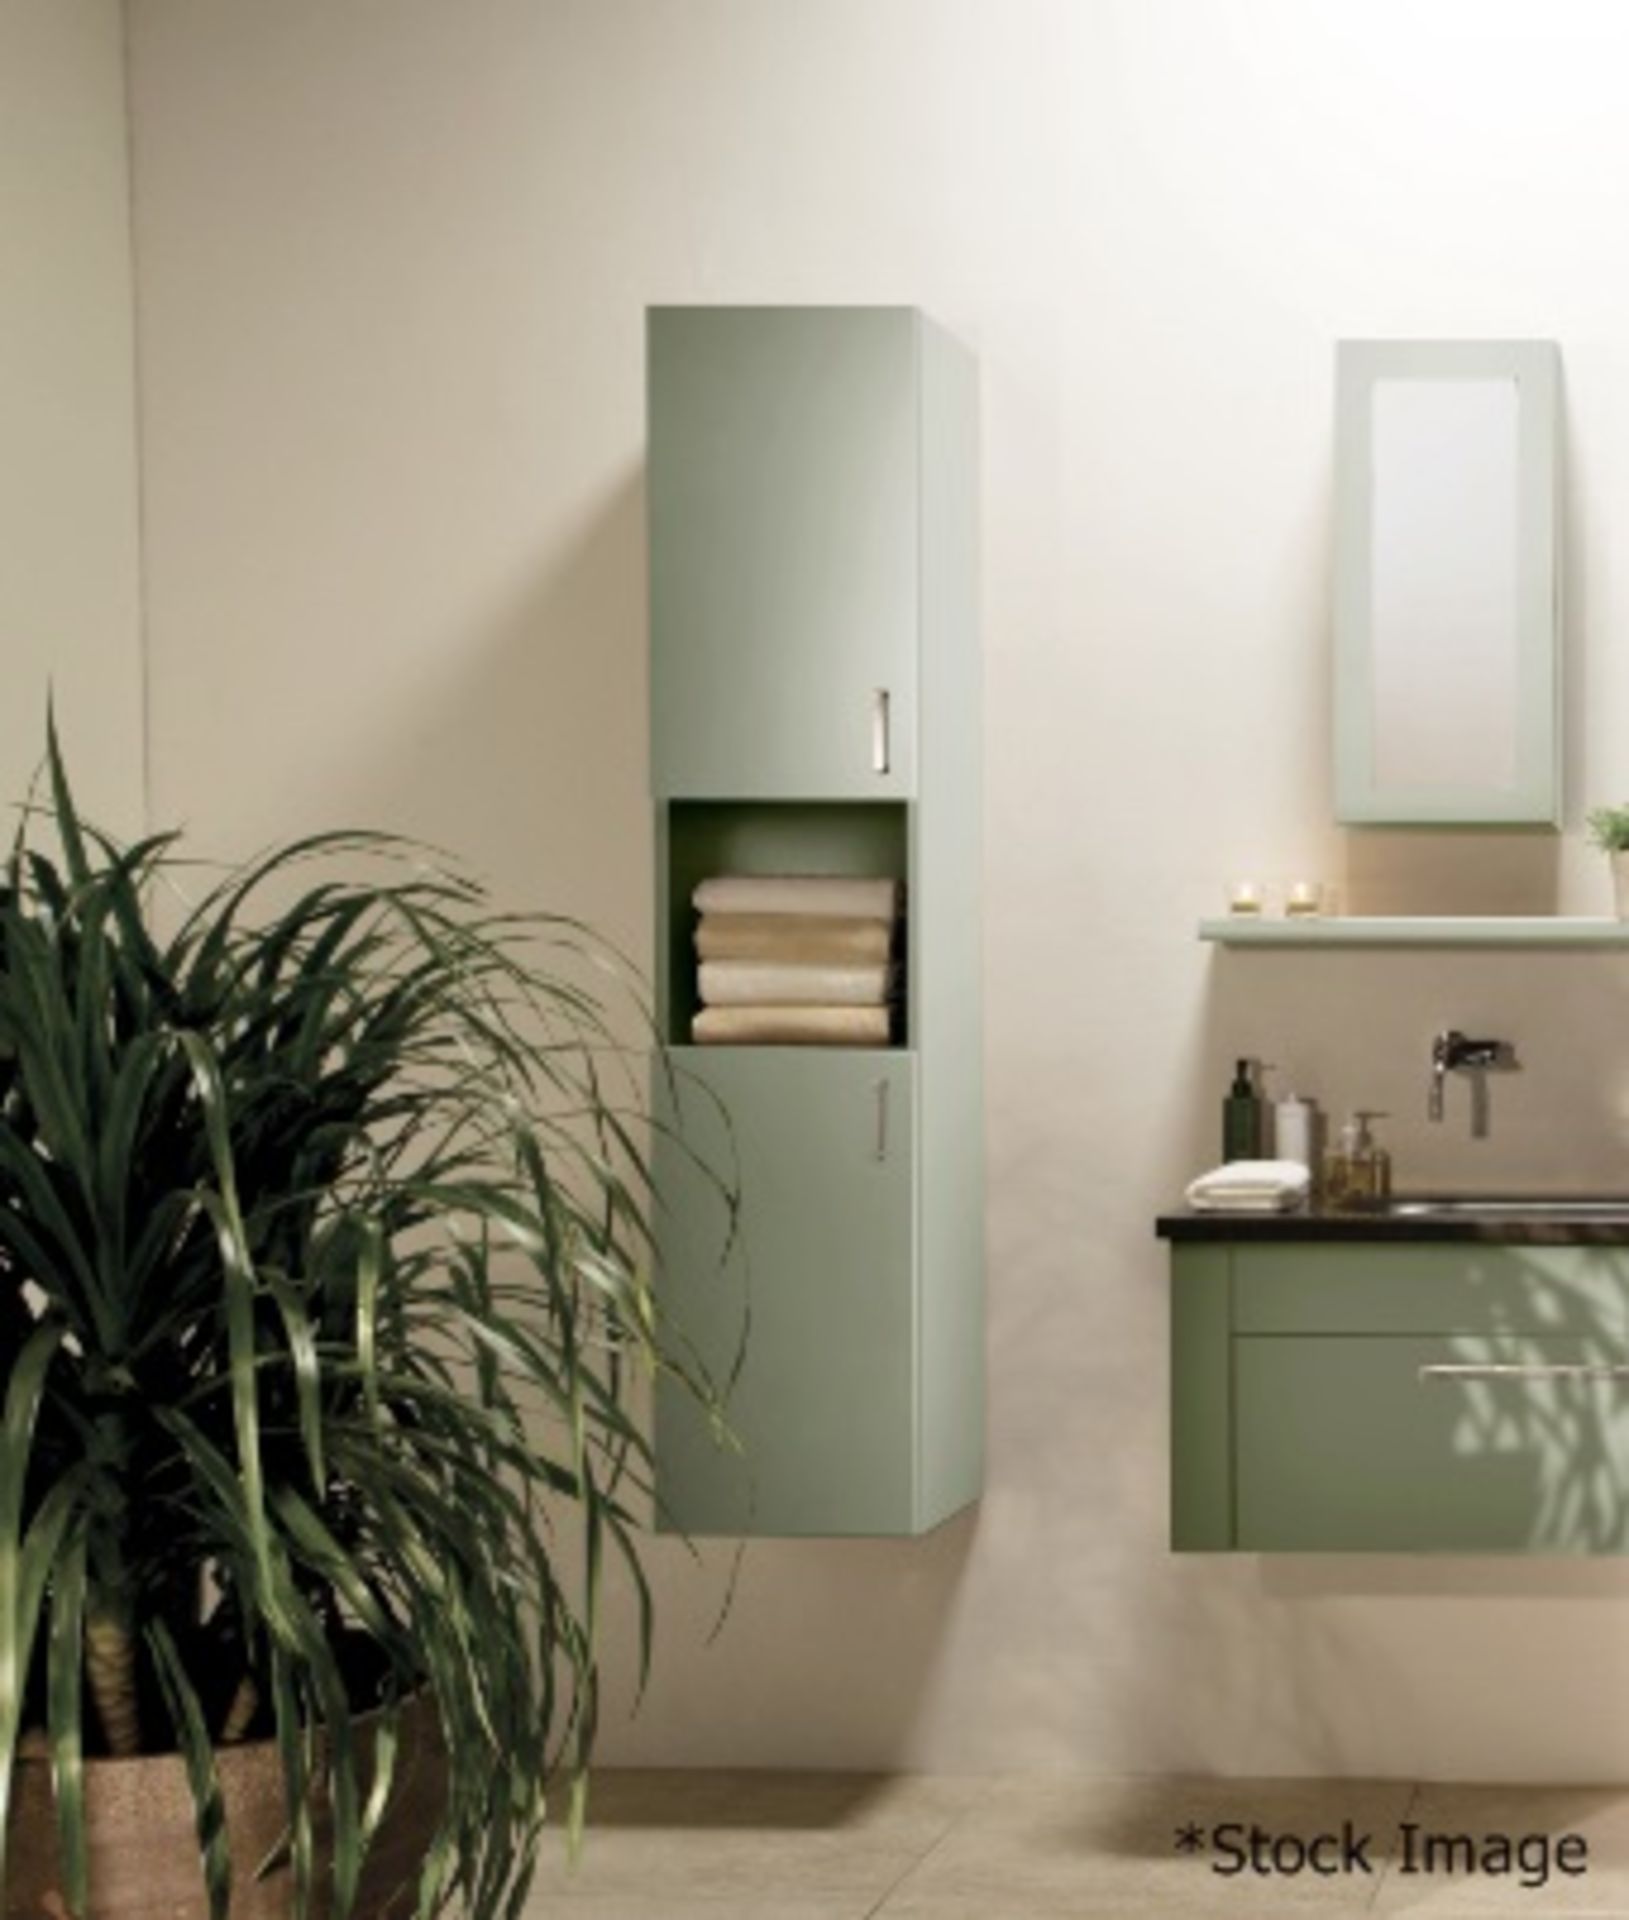 1 x STONEARTH 'VENICE' Sleek Solid Wood Wall Hung 2-Door Bathroom Storage Cabinet In A Pale Green